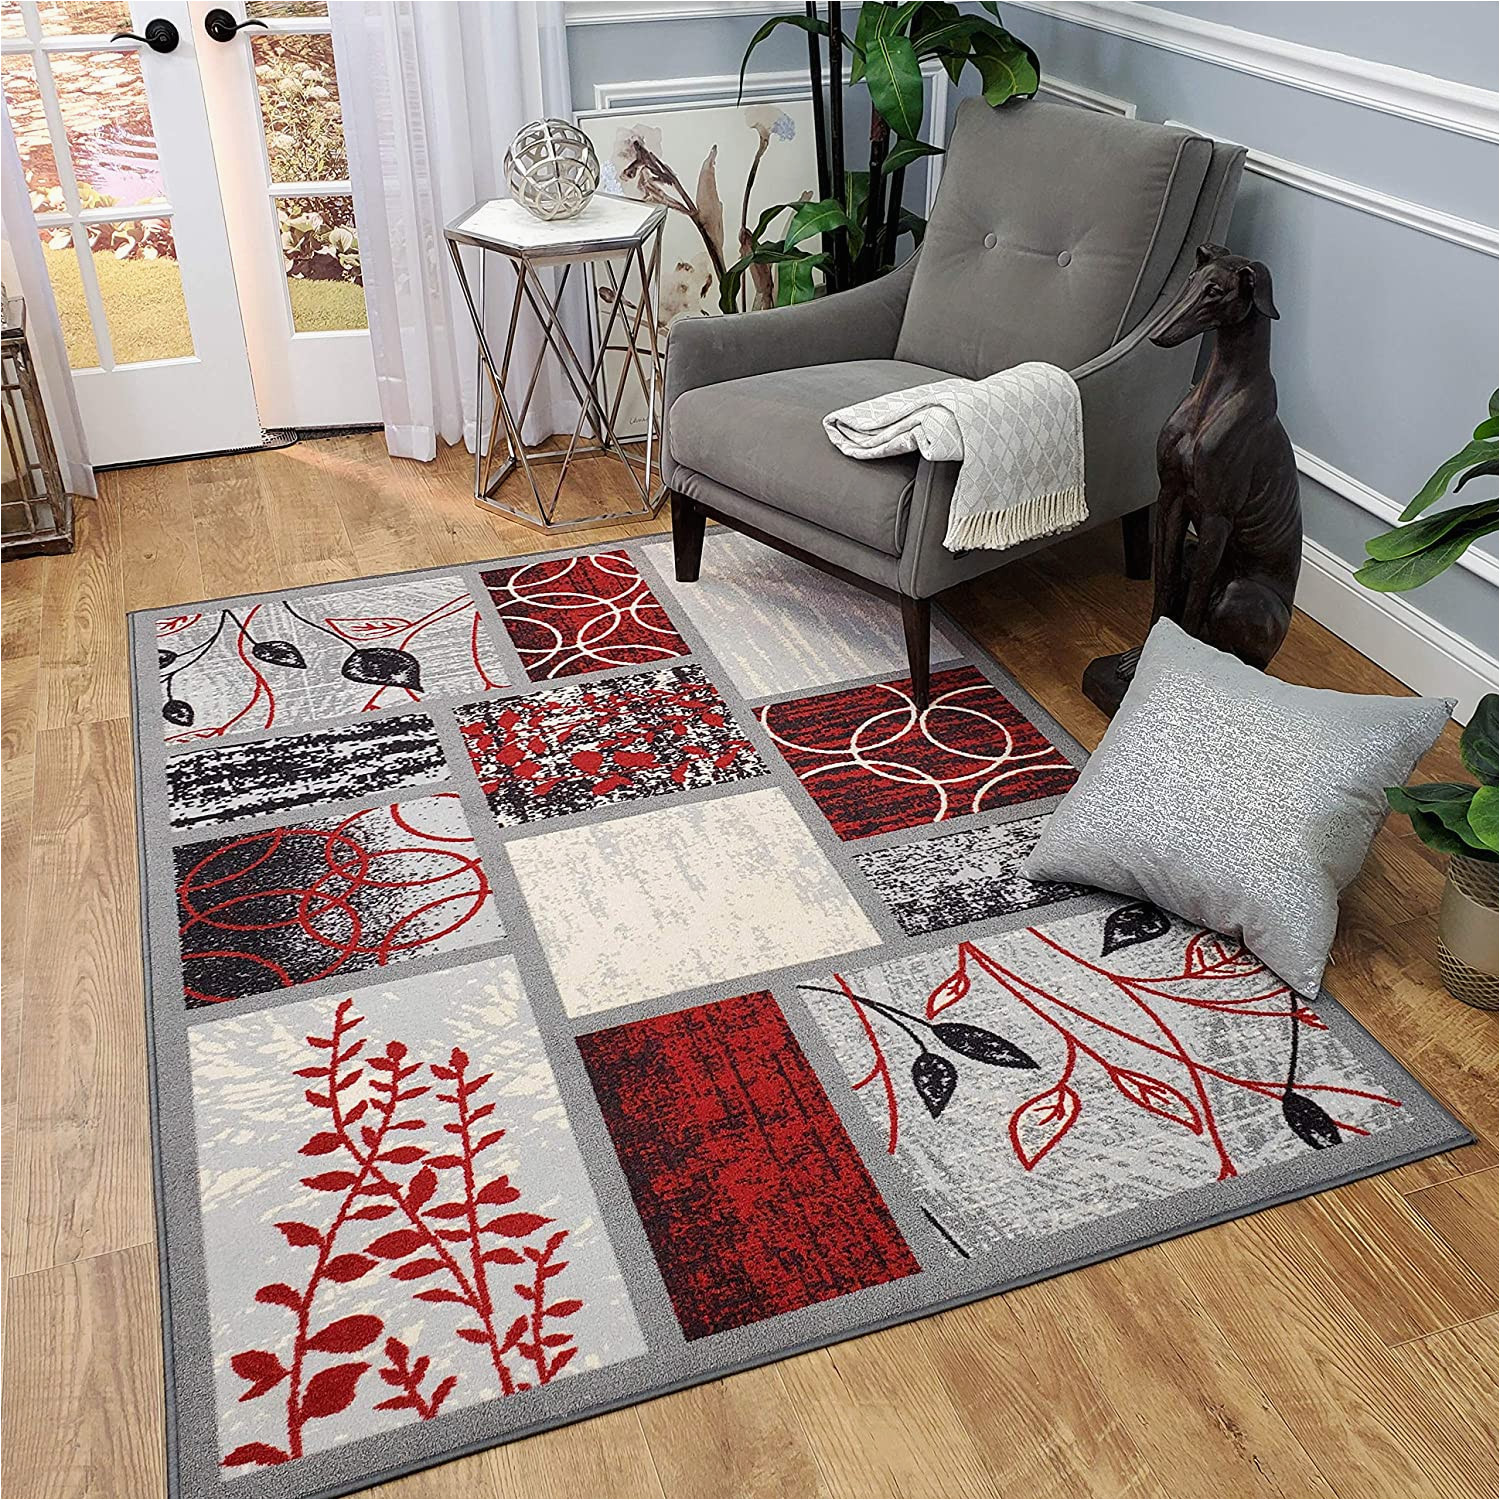 3×5 area Rugs On Sale Rubber Backed area Rug, 39 X 58 Inch (fits 3×5 area), Red Grey Geometric, Non Slip, Kitchen Rugs and Mats